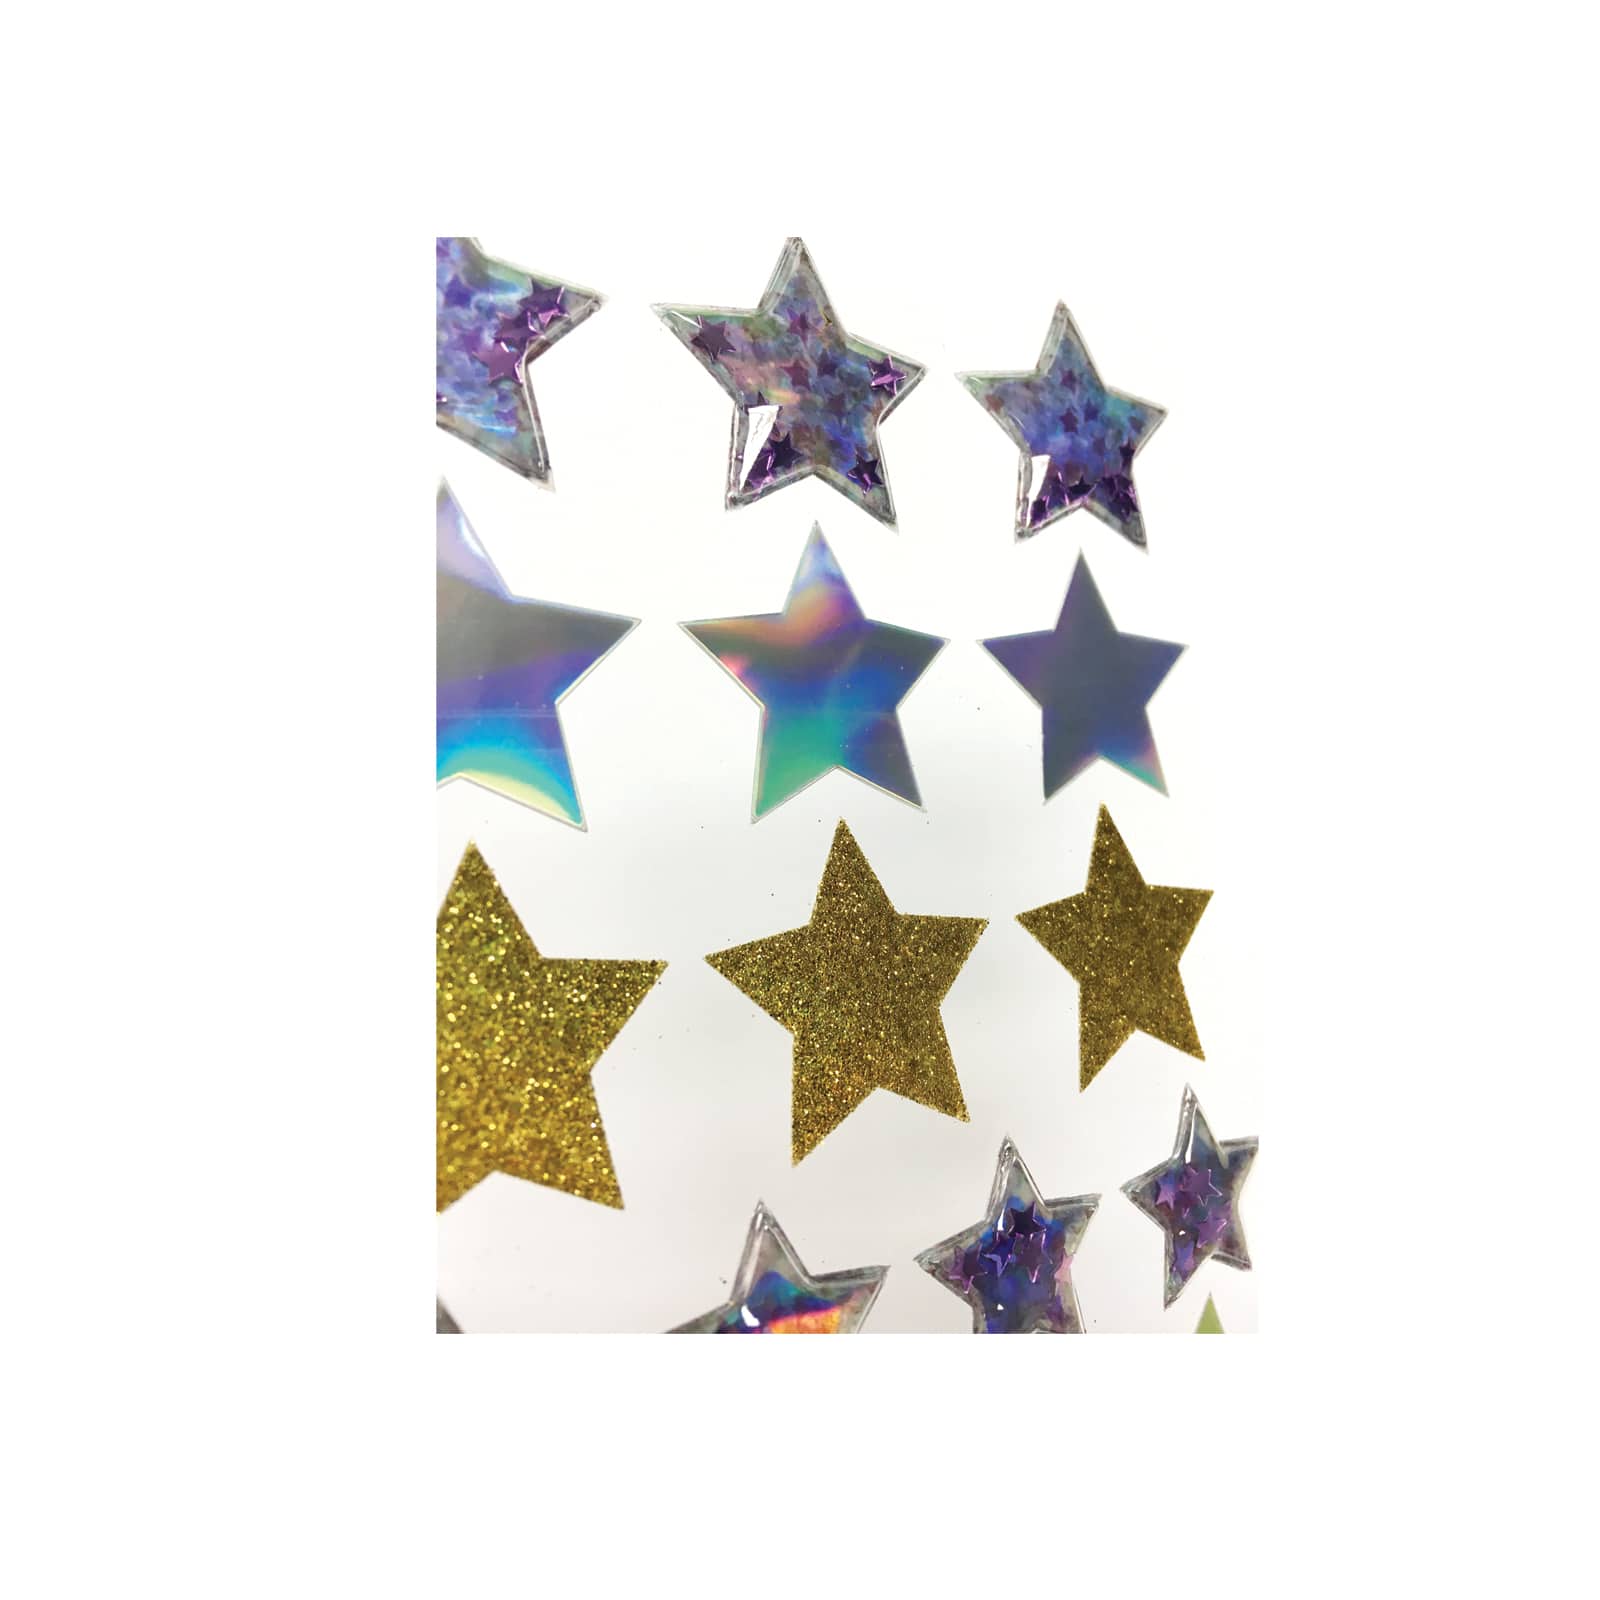 12 Packs: 45 ct. (540 total) Gold Glitter Star Stickers by Recollections™